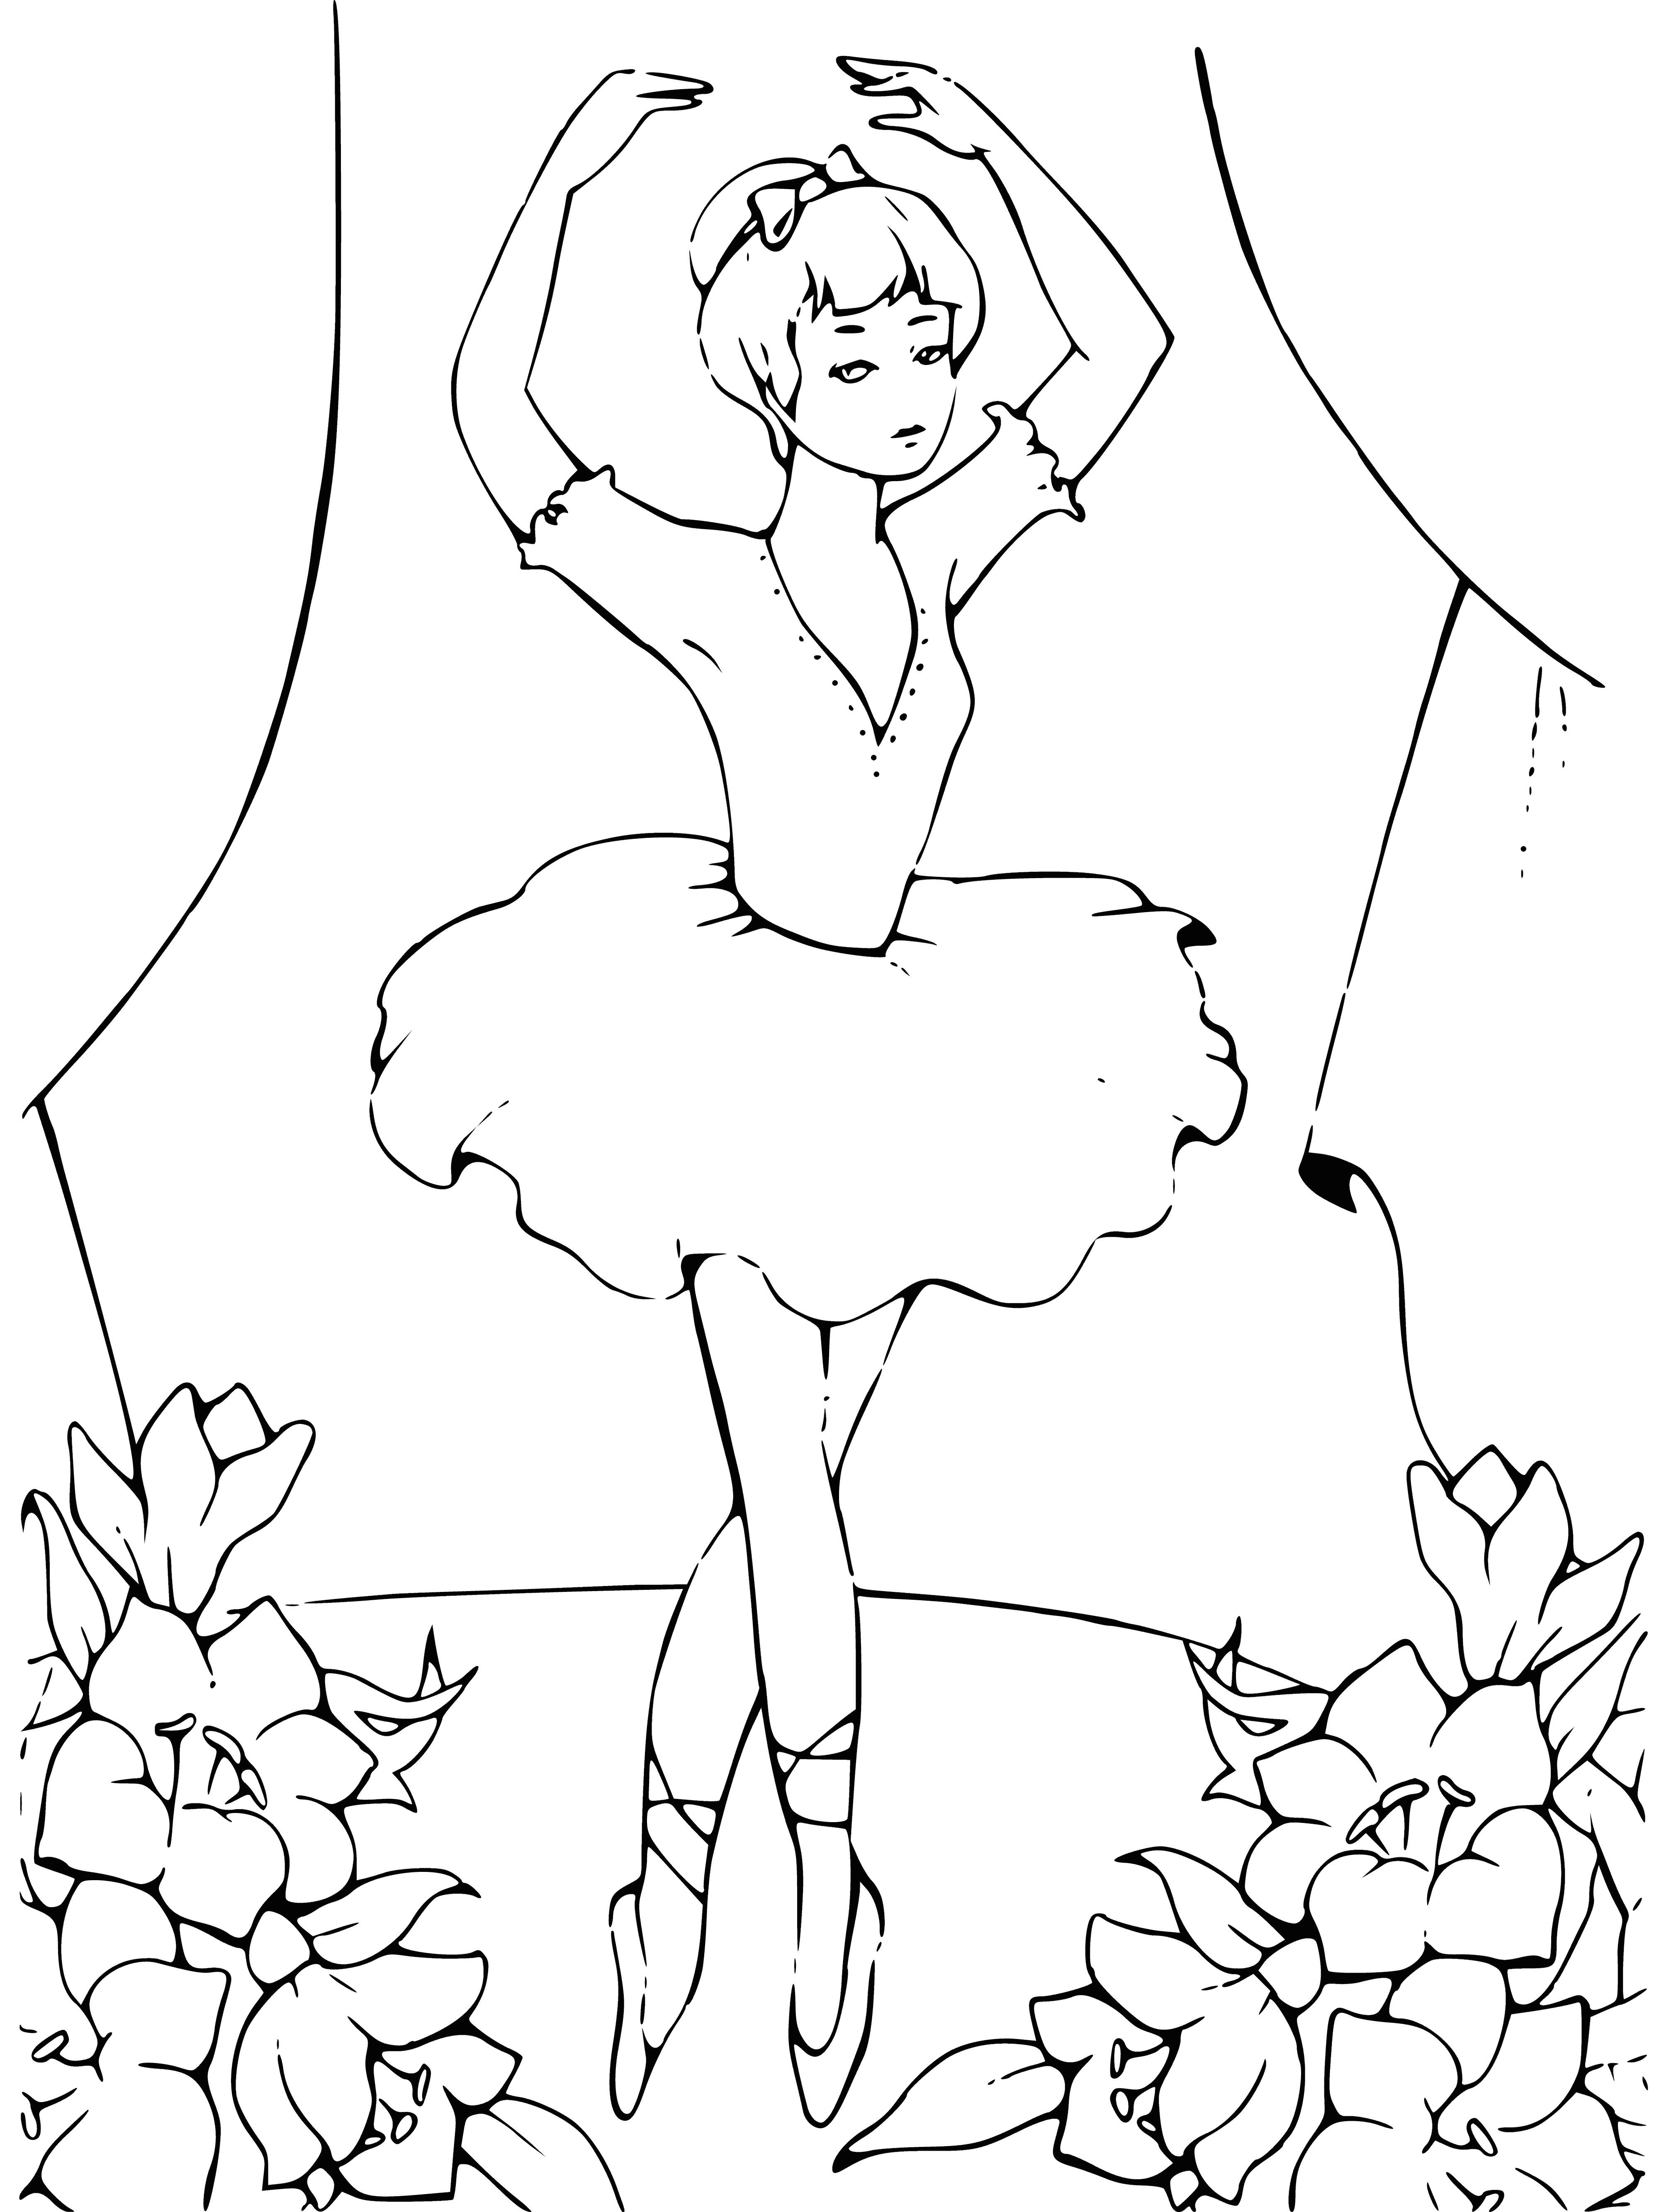 coloring page: Two ballerinas wearing white, hair in bun, one tiptoeing, other extending arms, both with serious look.